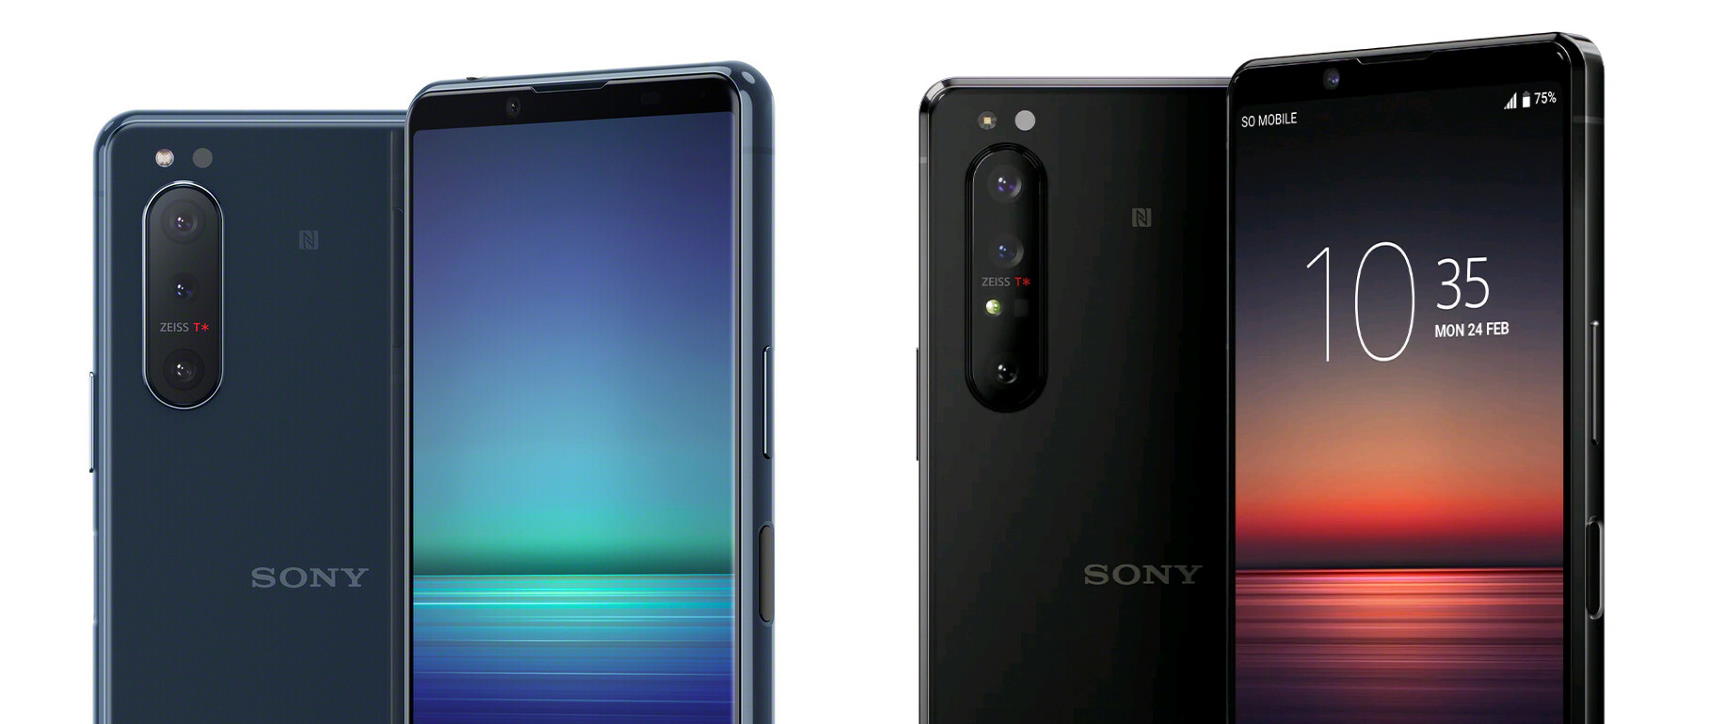 The Sony Xperia 1 II and Xperia 5 II will receive three OS upgrades; no Android 11 for the Xperia XZ3 or earlier models though - NotebookCheck.net News